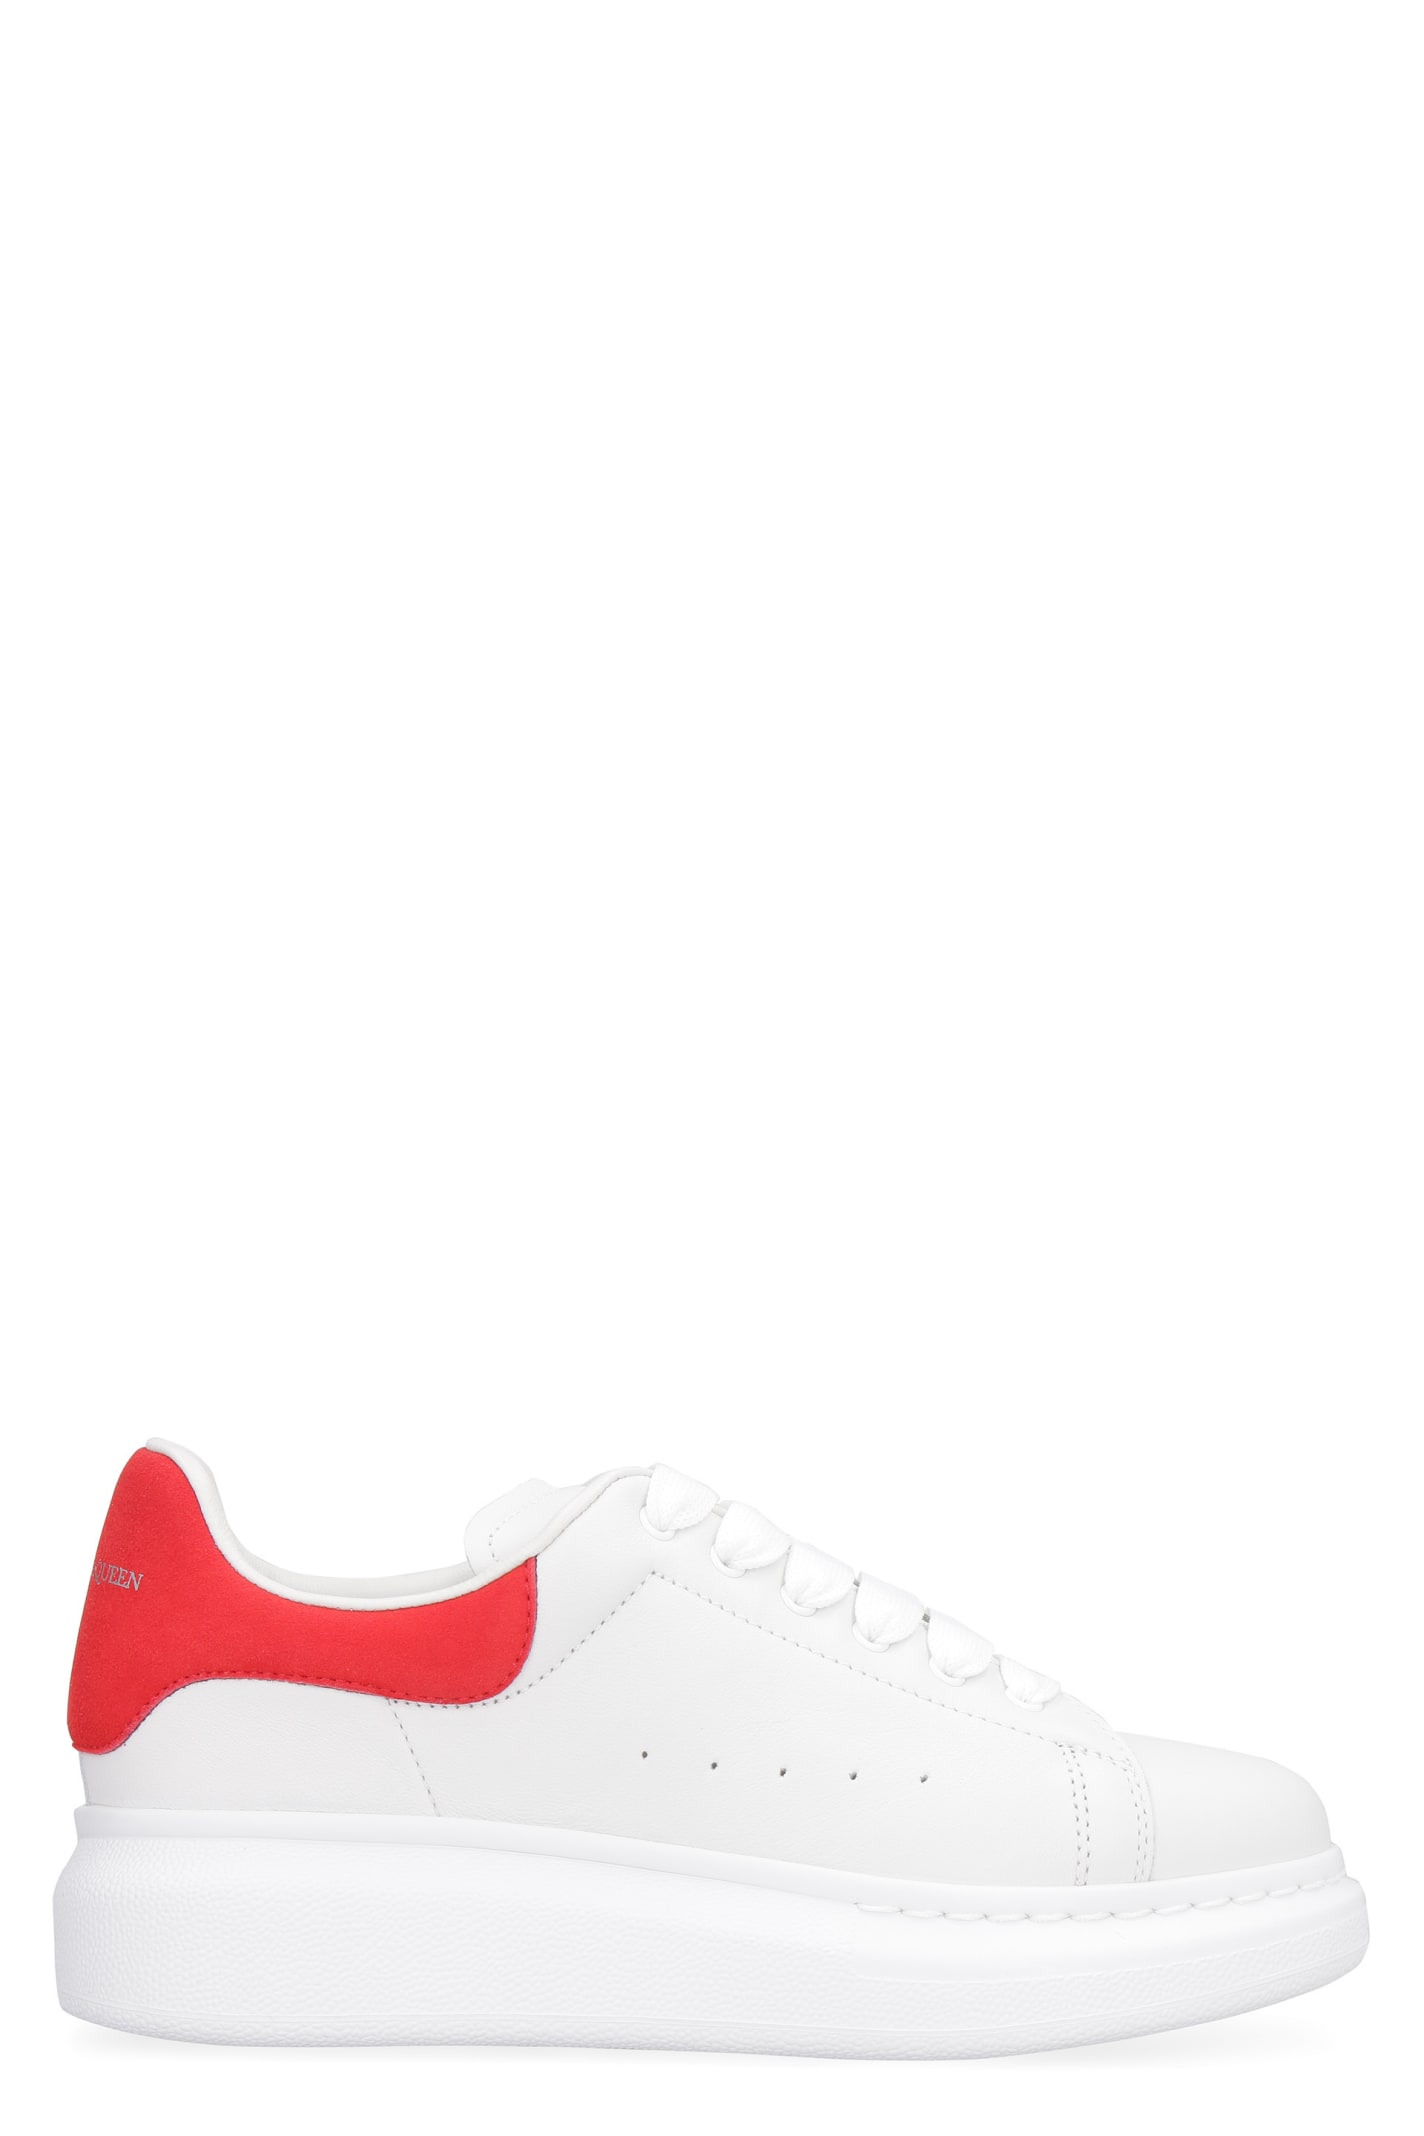 Alexander McQueen Molly Leather Sneakers